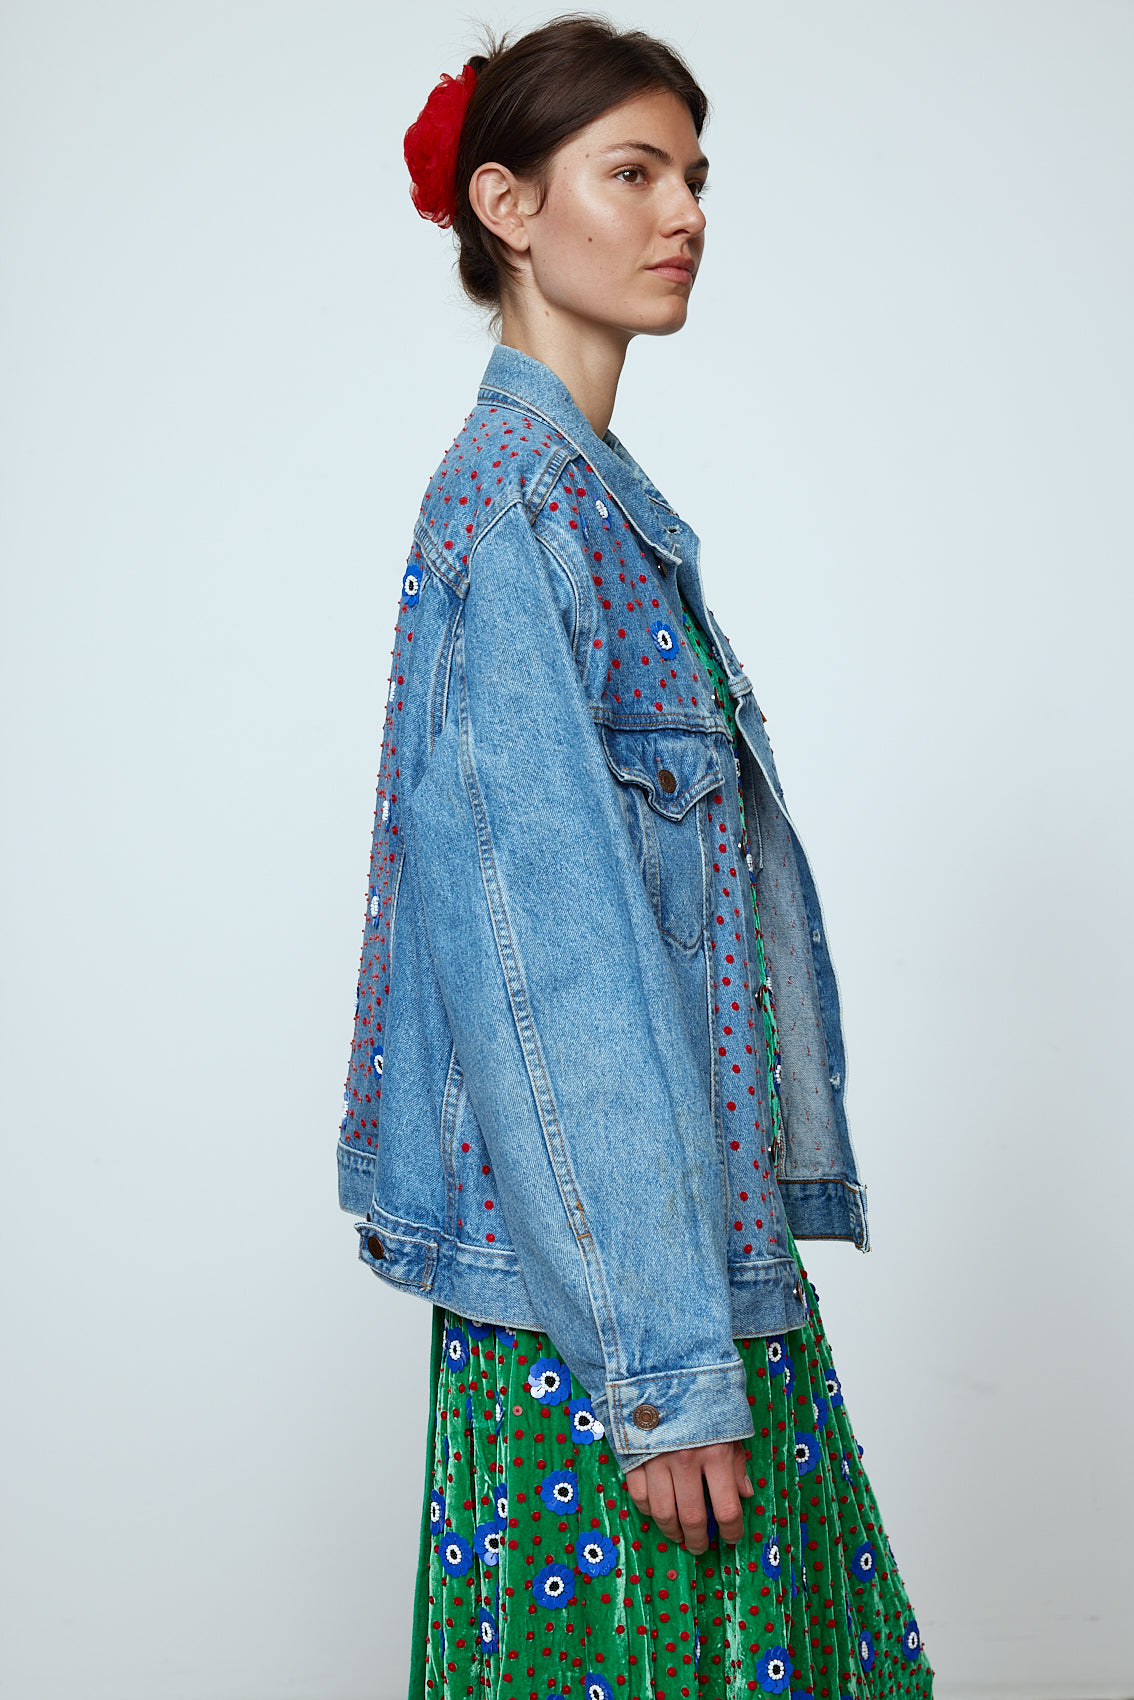 Upcycled Denim Jacket exquisitely hand-embroidered by skilled artisans in our flower daisy pattern using beadings and sequins.